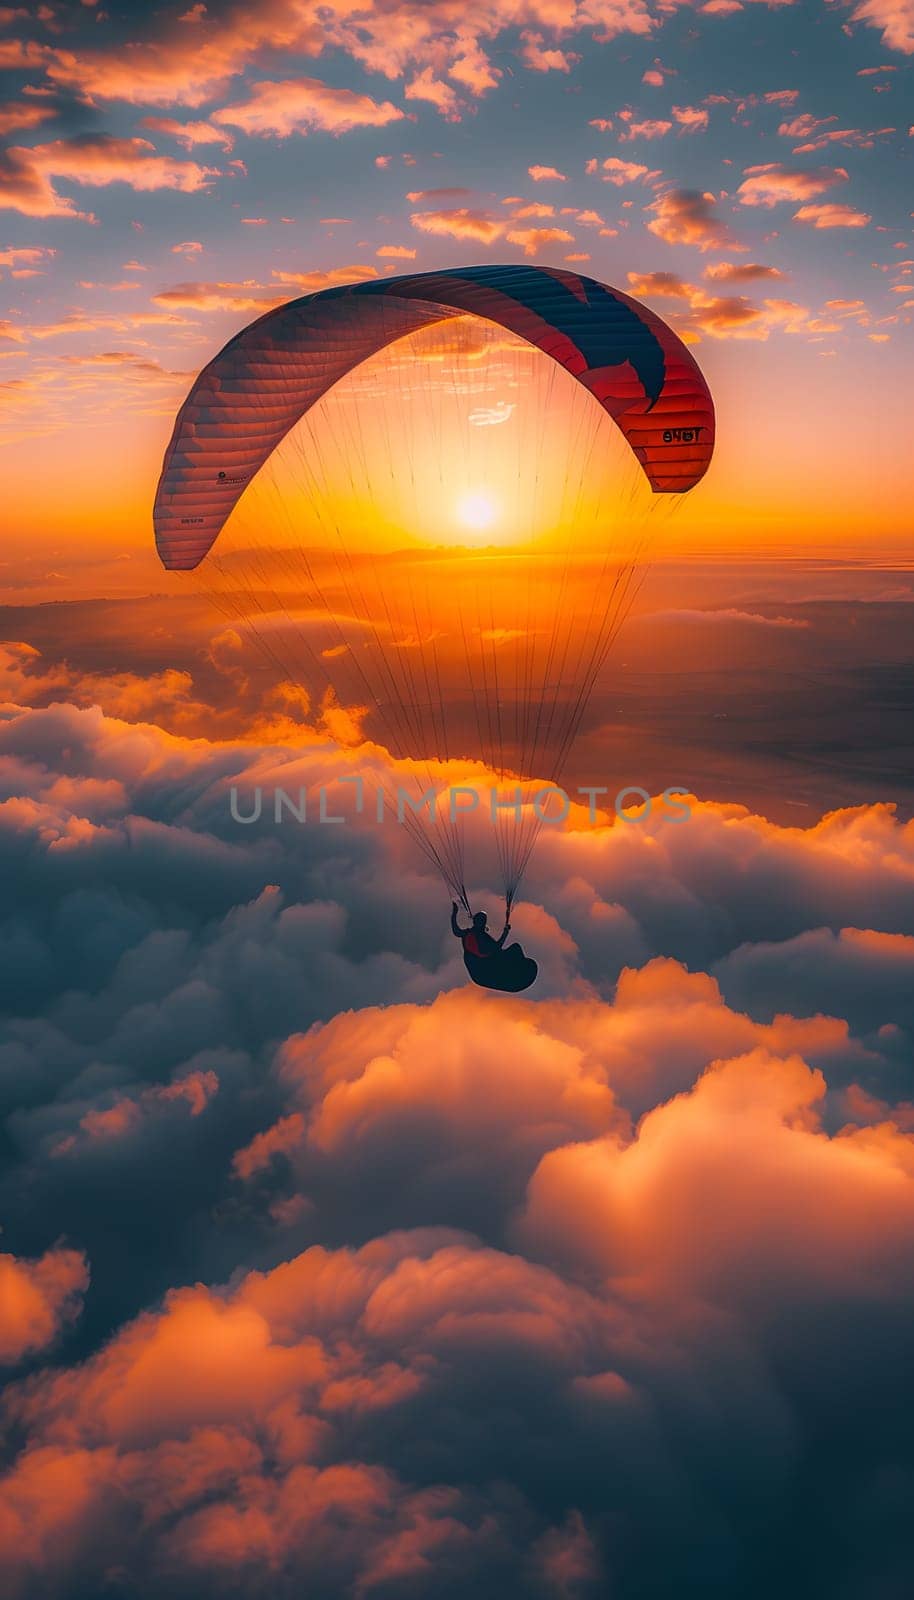 Person parasailing at sunset, hovering over clouds in the orange afterglow by Nadtochiy